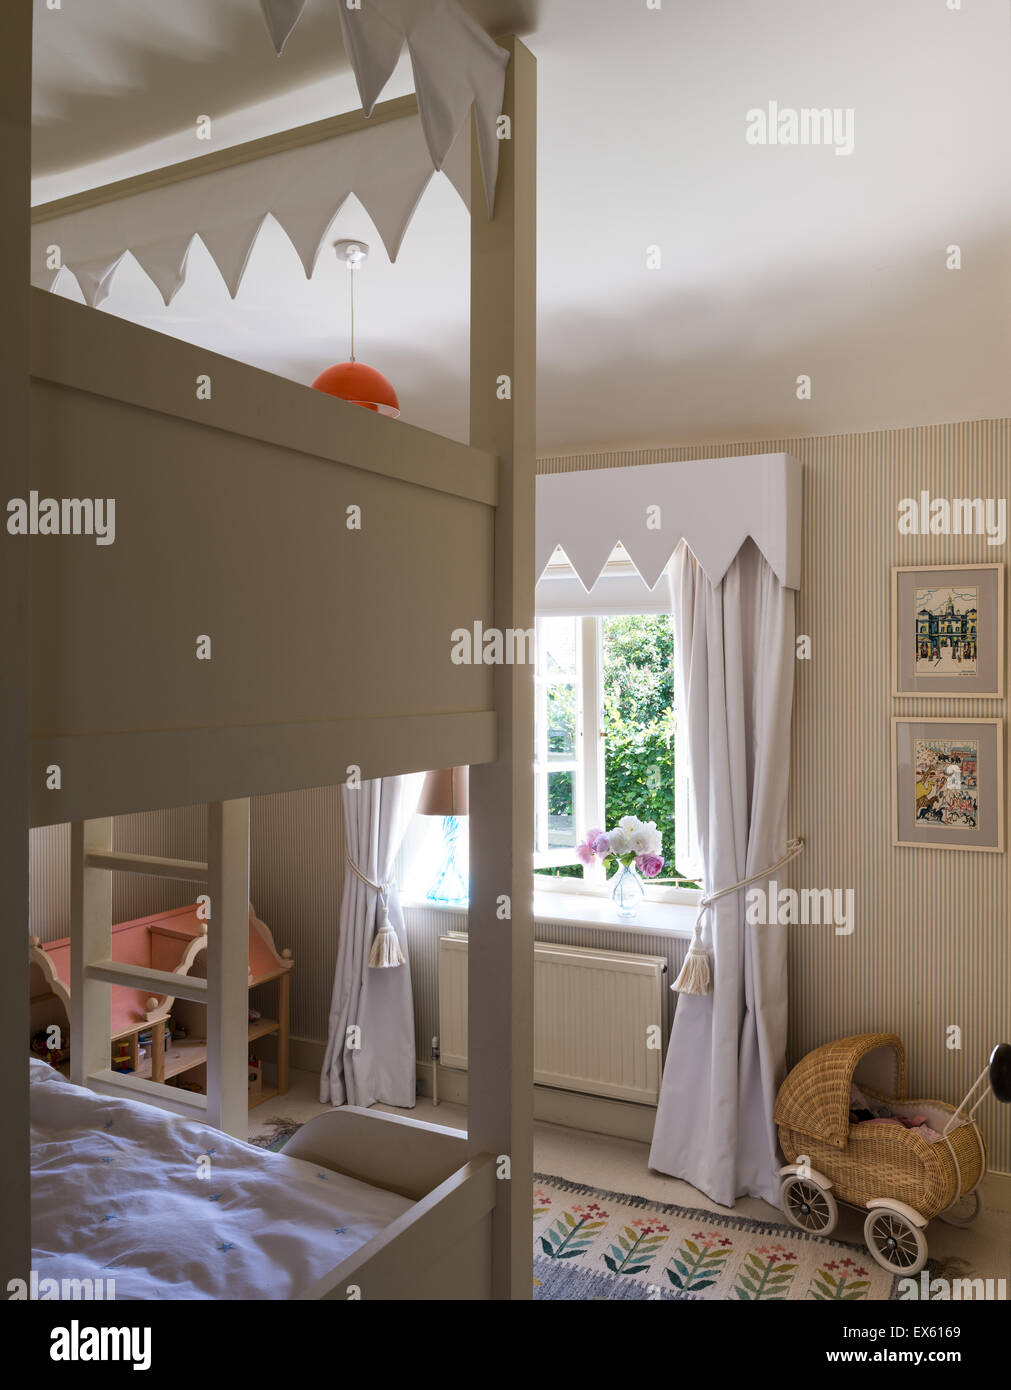 Osborn and Little striped wallpaper in kids bedroom with bunk beds and Polish folk rug Stock Photo